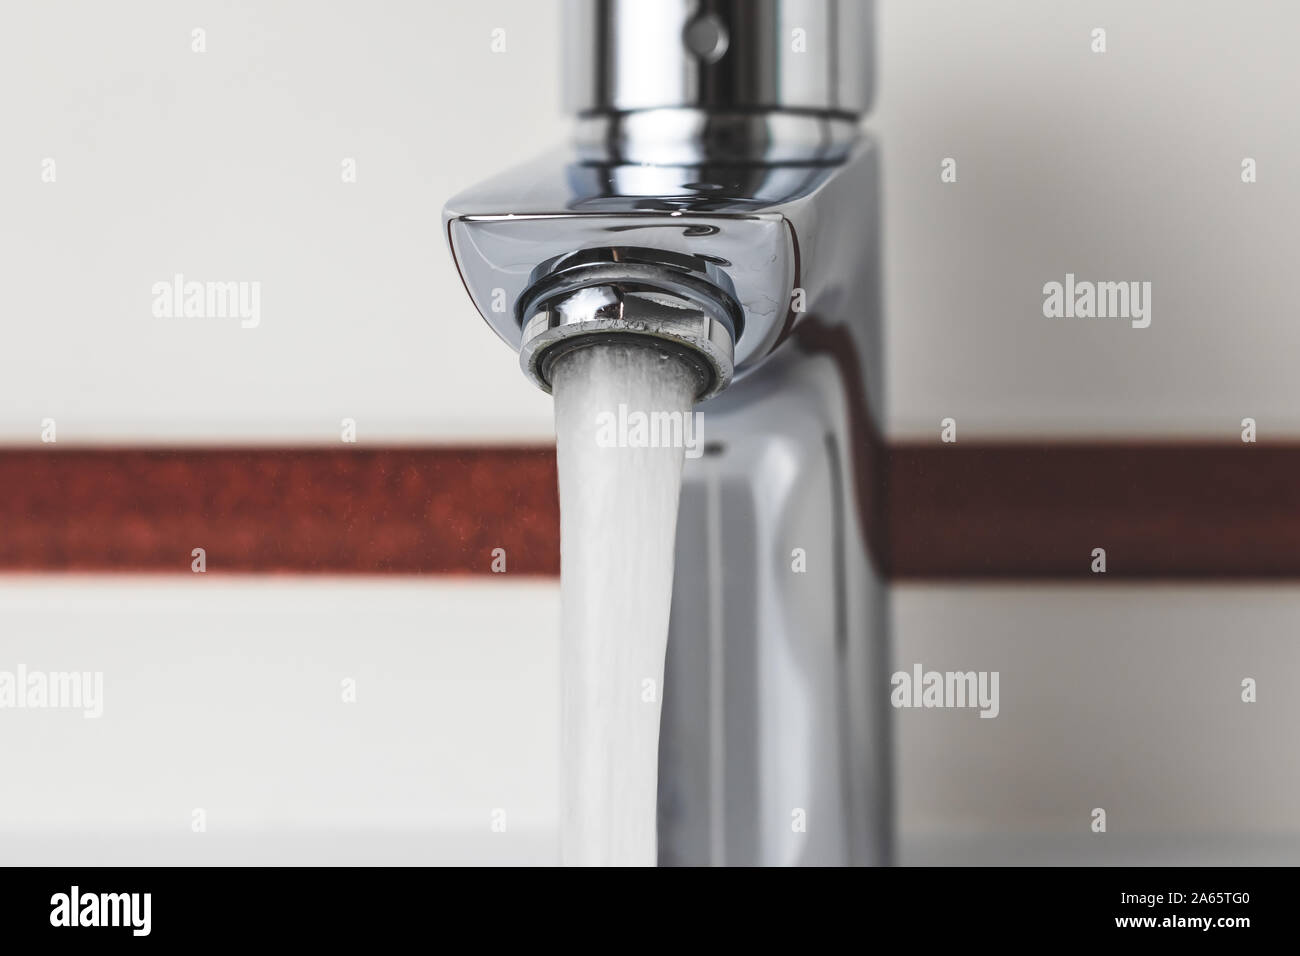 Water tap close-up. Water flow, stream. Water is pouring from the tap. Stock Photo